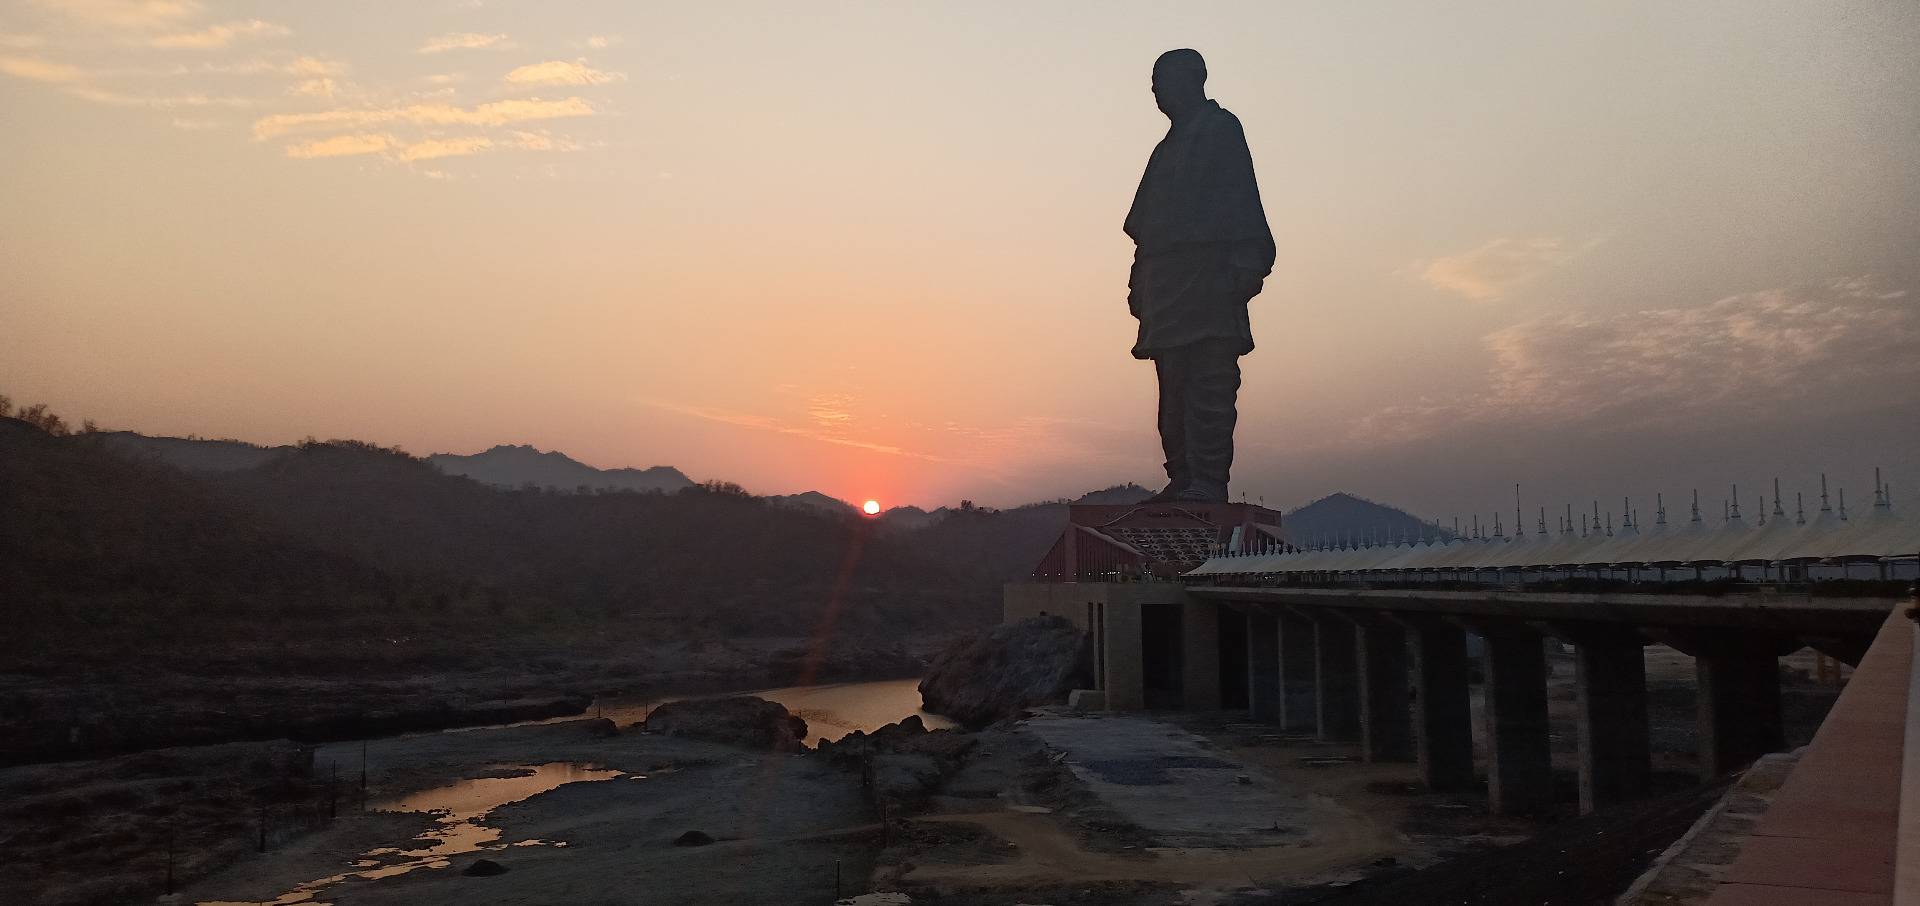 The evening at Statue of Unity